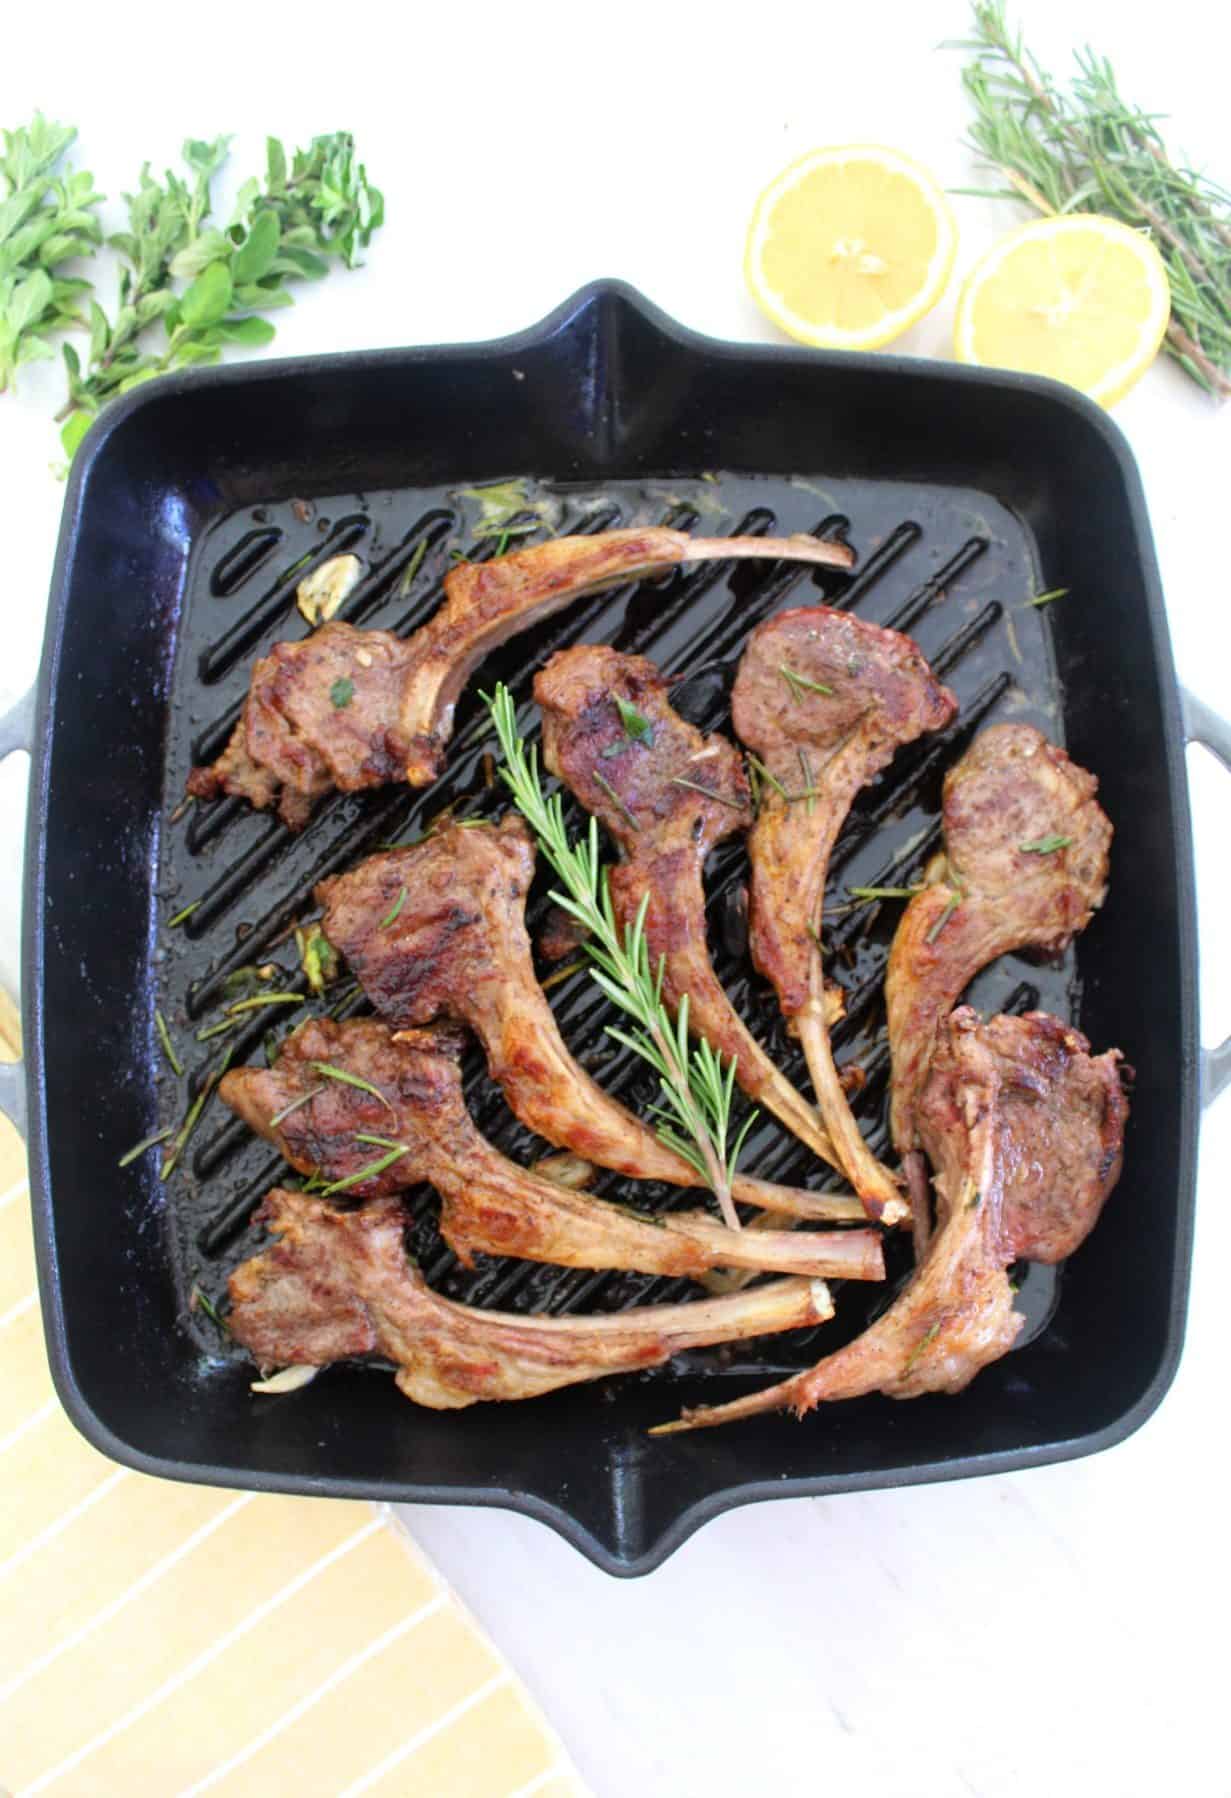 Lamb chops on cast iron pan, decorated with rosemary. Picture is styled with some fresh lemon, rosemary and oregano on the side of the pan.